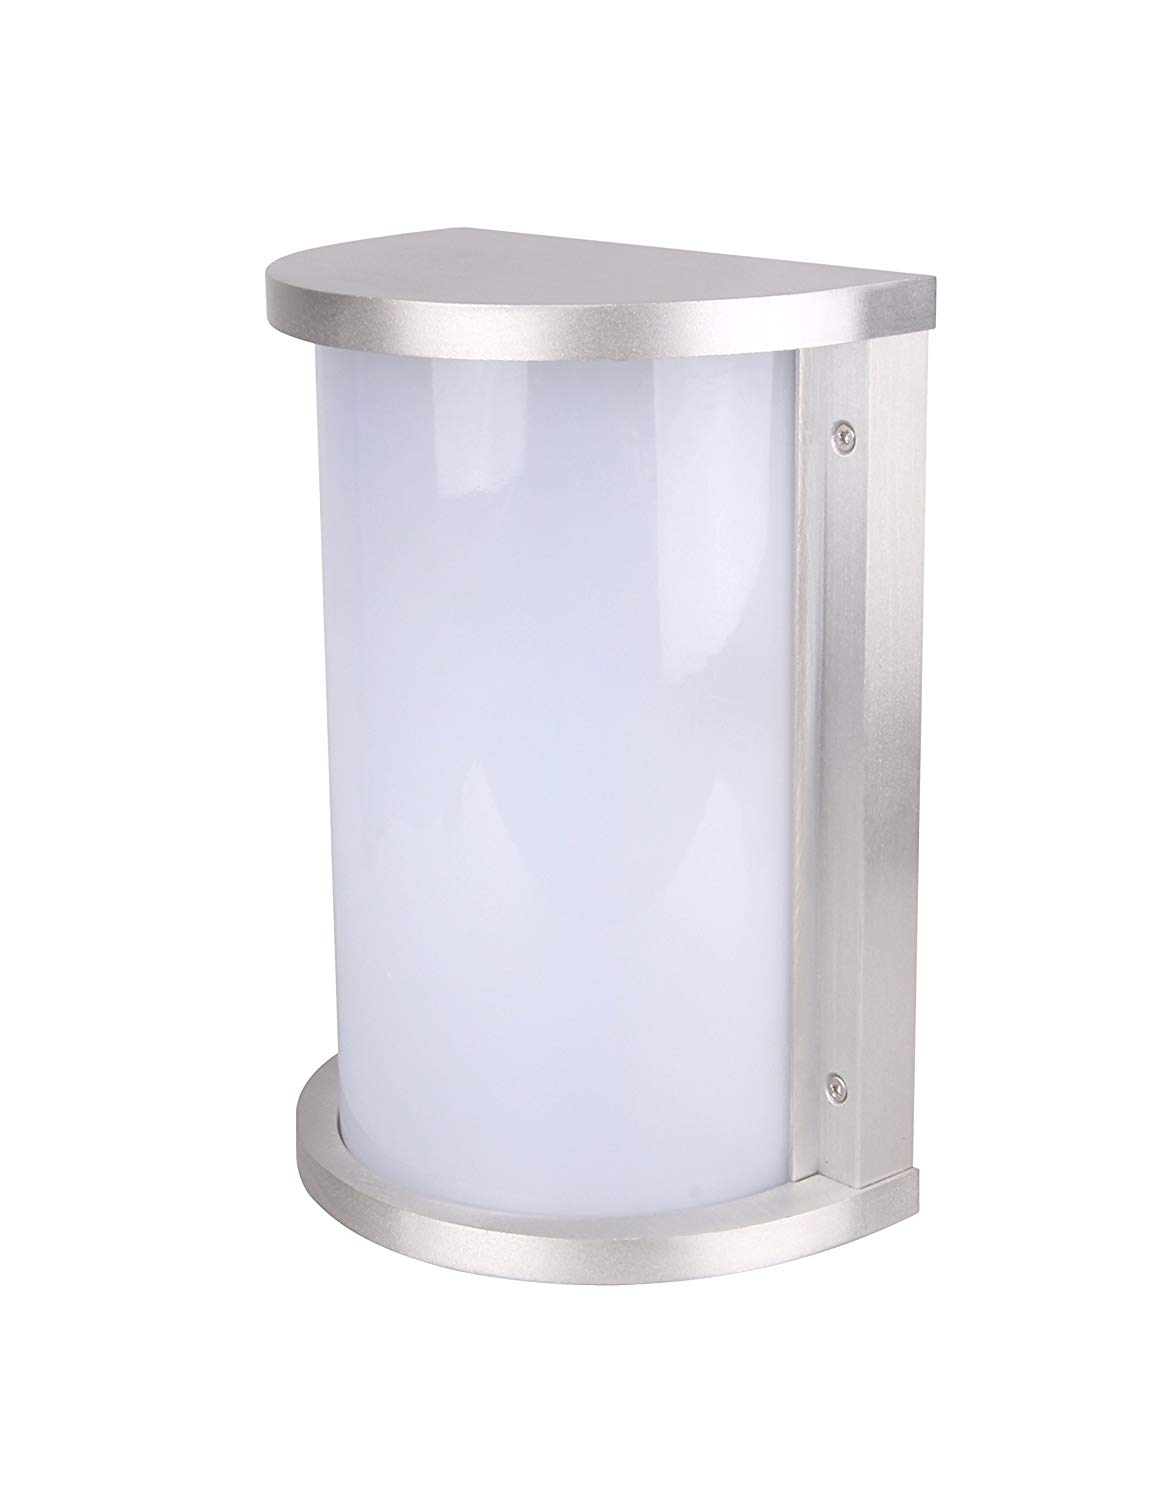 LIT-PaTH Outdoor/Indoor LED Wall Lantern, Wall Sconce as Porch Light Fixture, 12.5W (75W Equivalent), 950 Lumen, Aluminum Housing Plus PC, Water-Proof and Outdoor Rated, ETL and ES Qualified